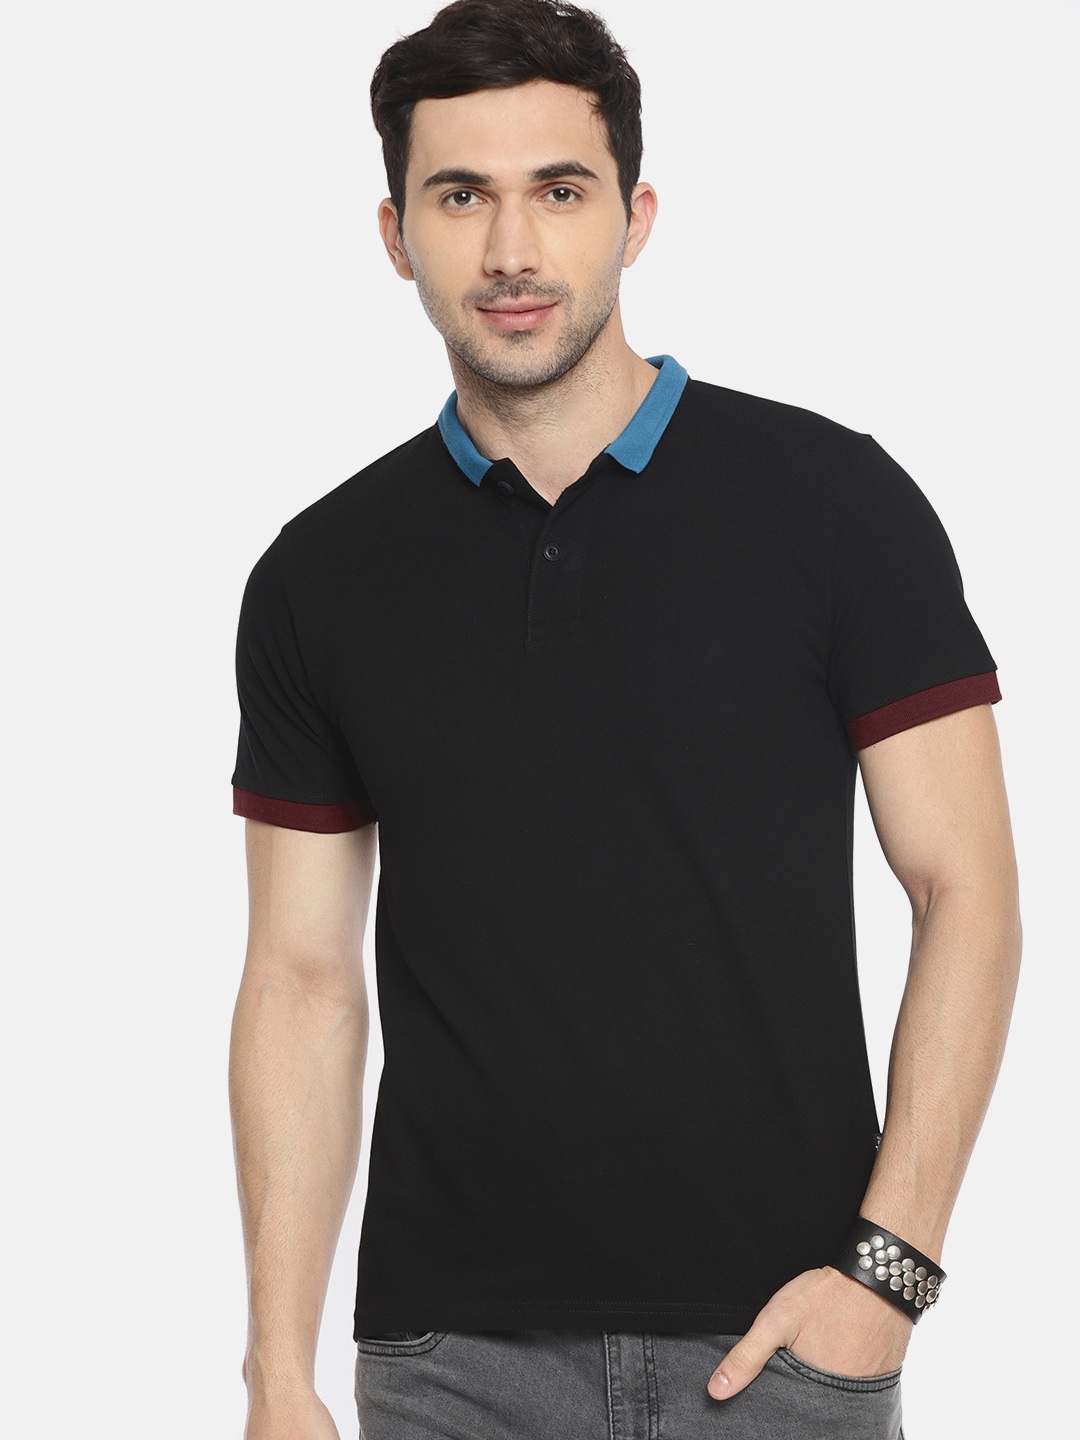 Buy The Roadster Lifestyle Co Men Black Solid Polo Collar Pure Cotton T ...